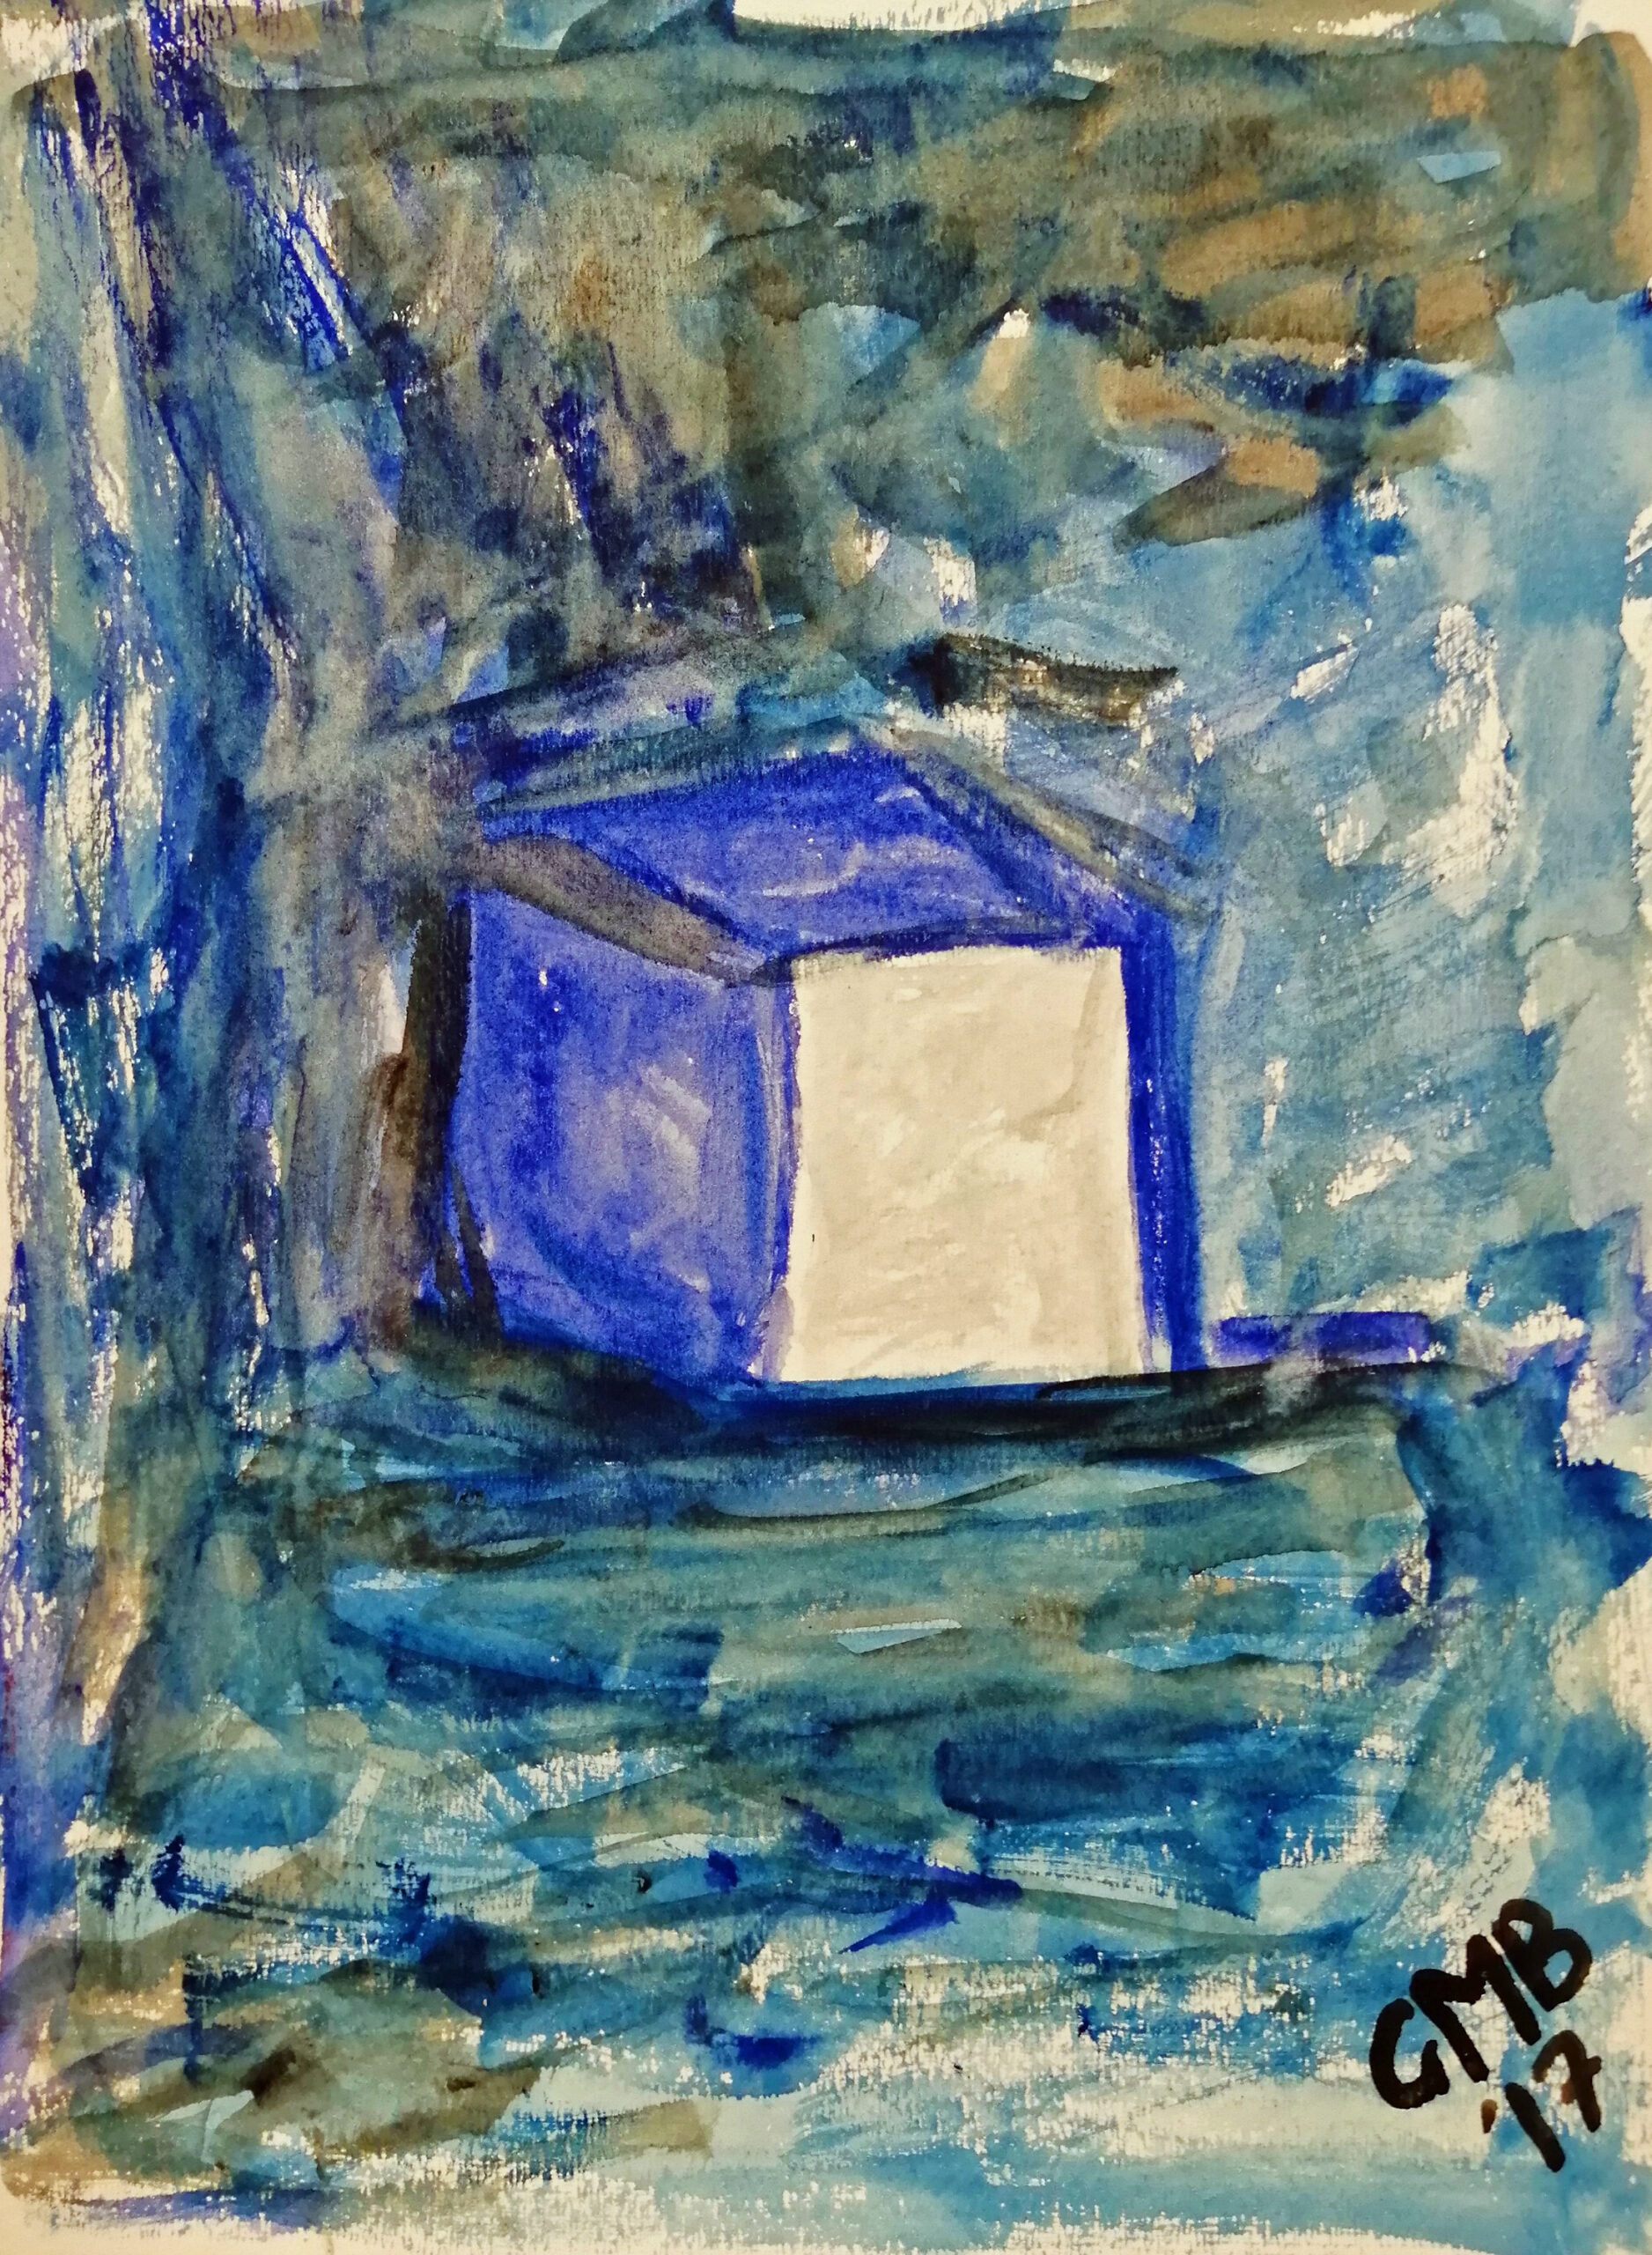 An abstract watercolor painting of a blue box.